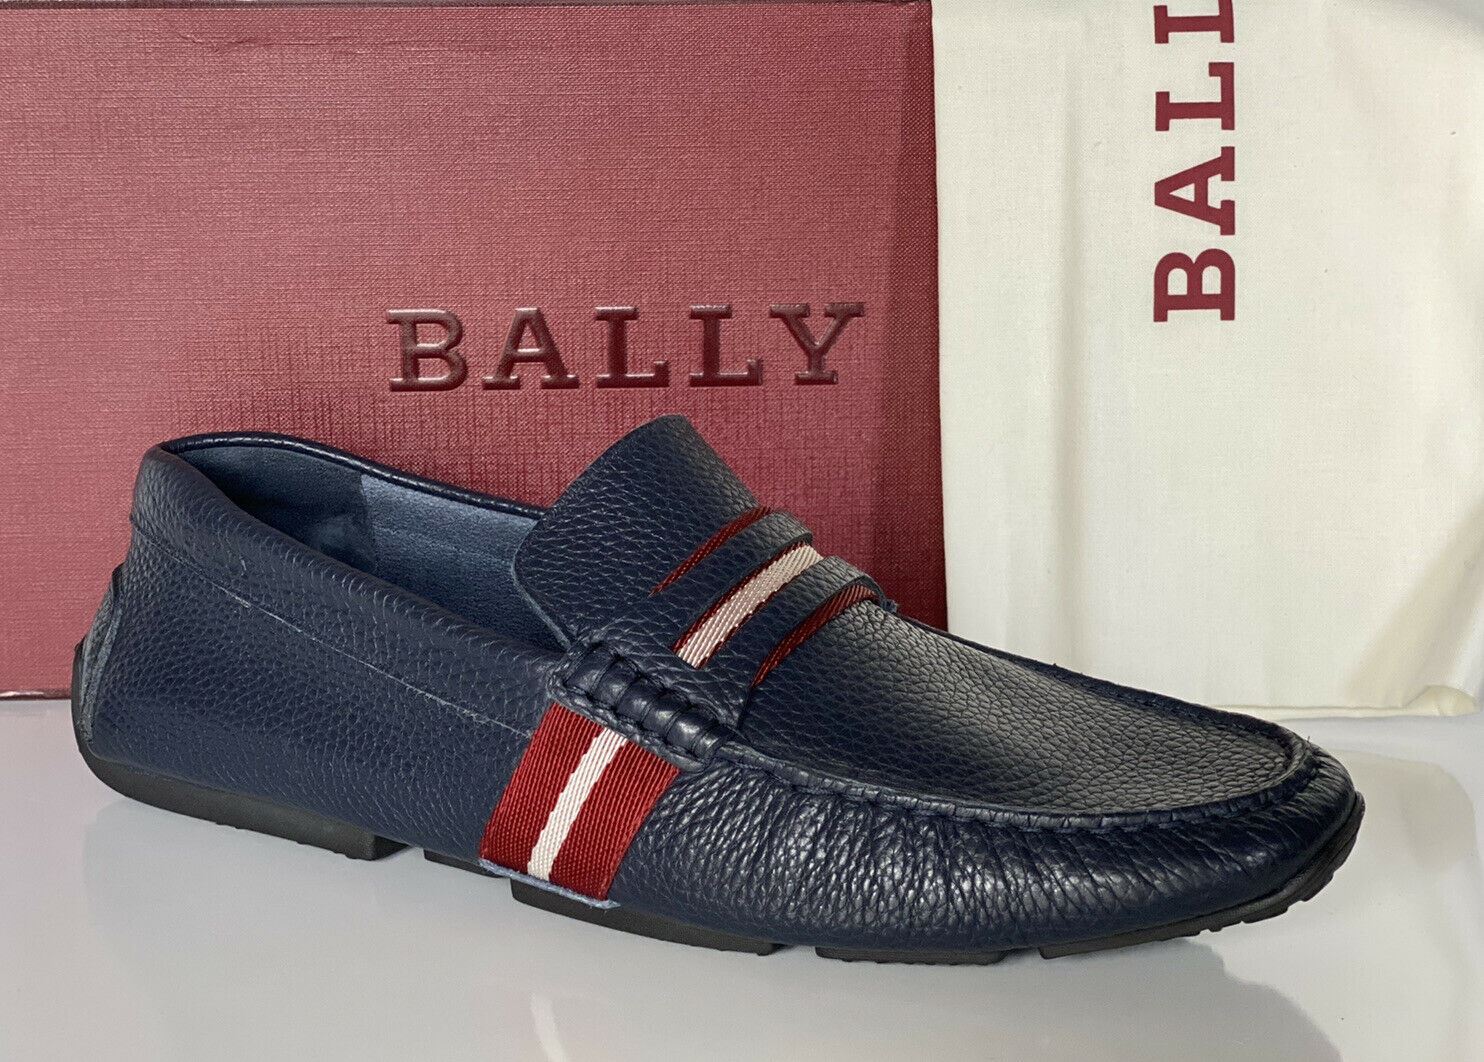 NIB Bally Mens Bovine Grained Leather Driver Shoes Blue 10.5 US 6228300 Italy